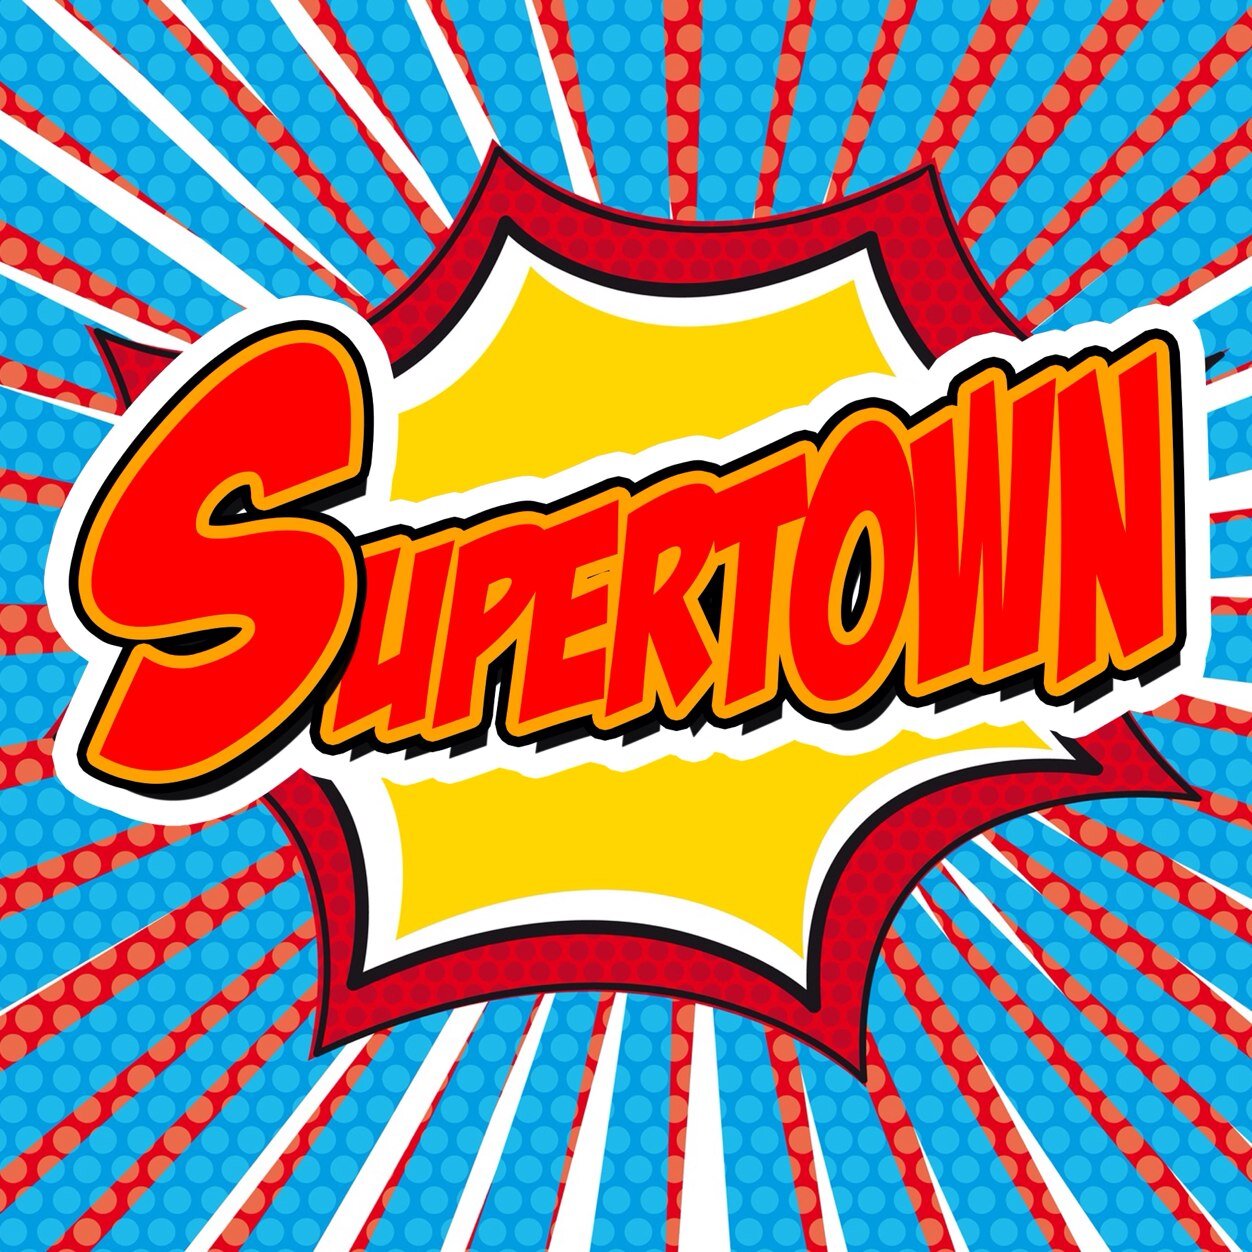 Supertown is a brand new comedy musical written by Leeds-based writing duo Sidgwick & Sanders. Premiered in Leeds in 2014 and featured at Edfringe in 2015!